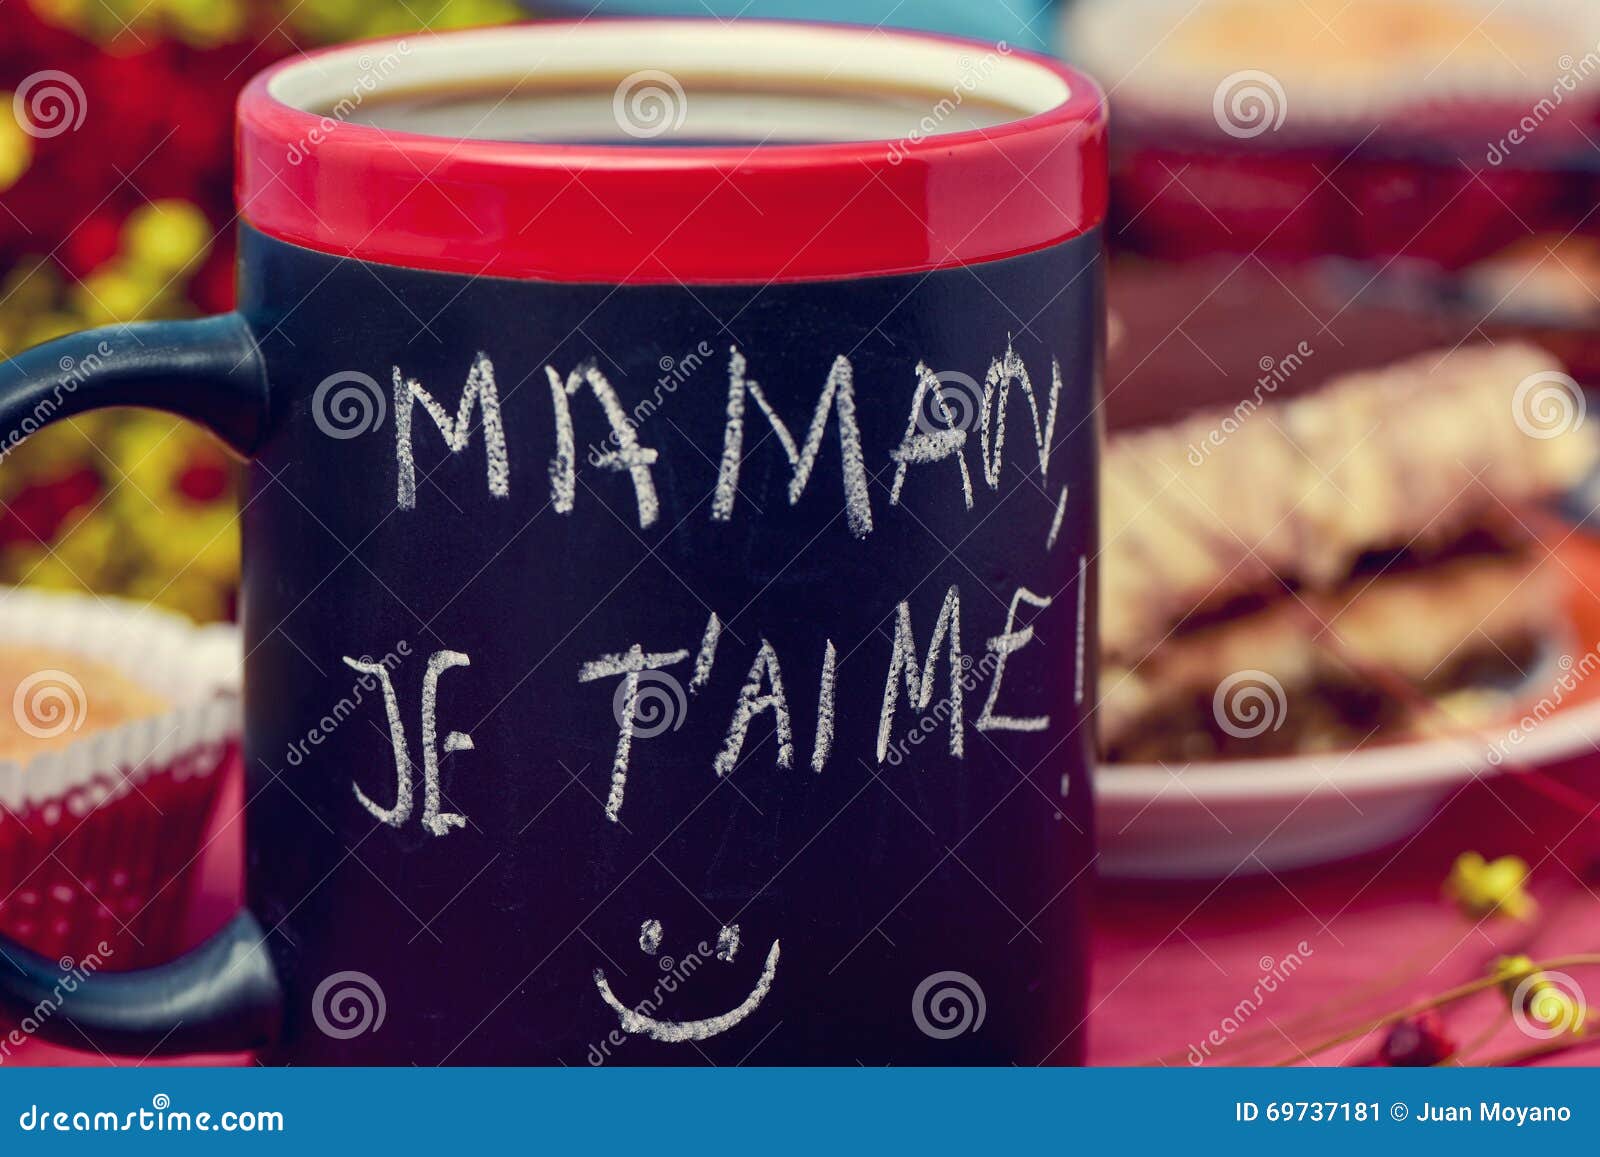 breakfast and text maman je t aime, i love you mom in french